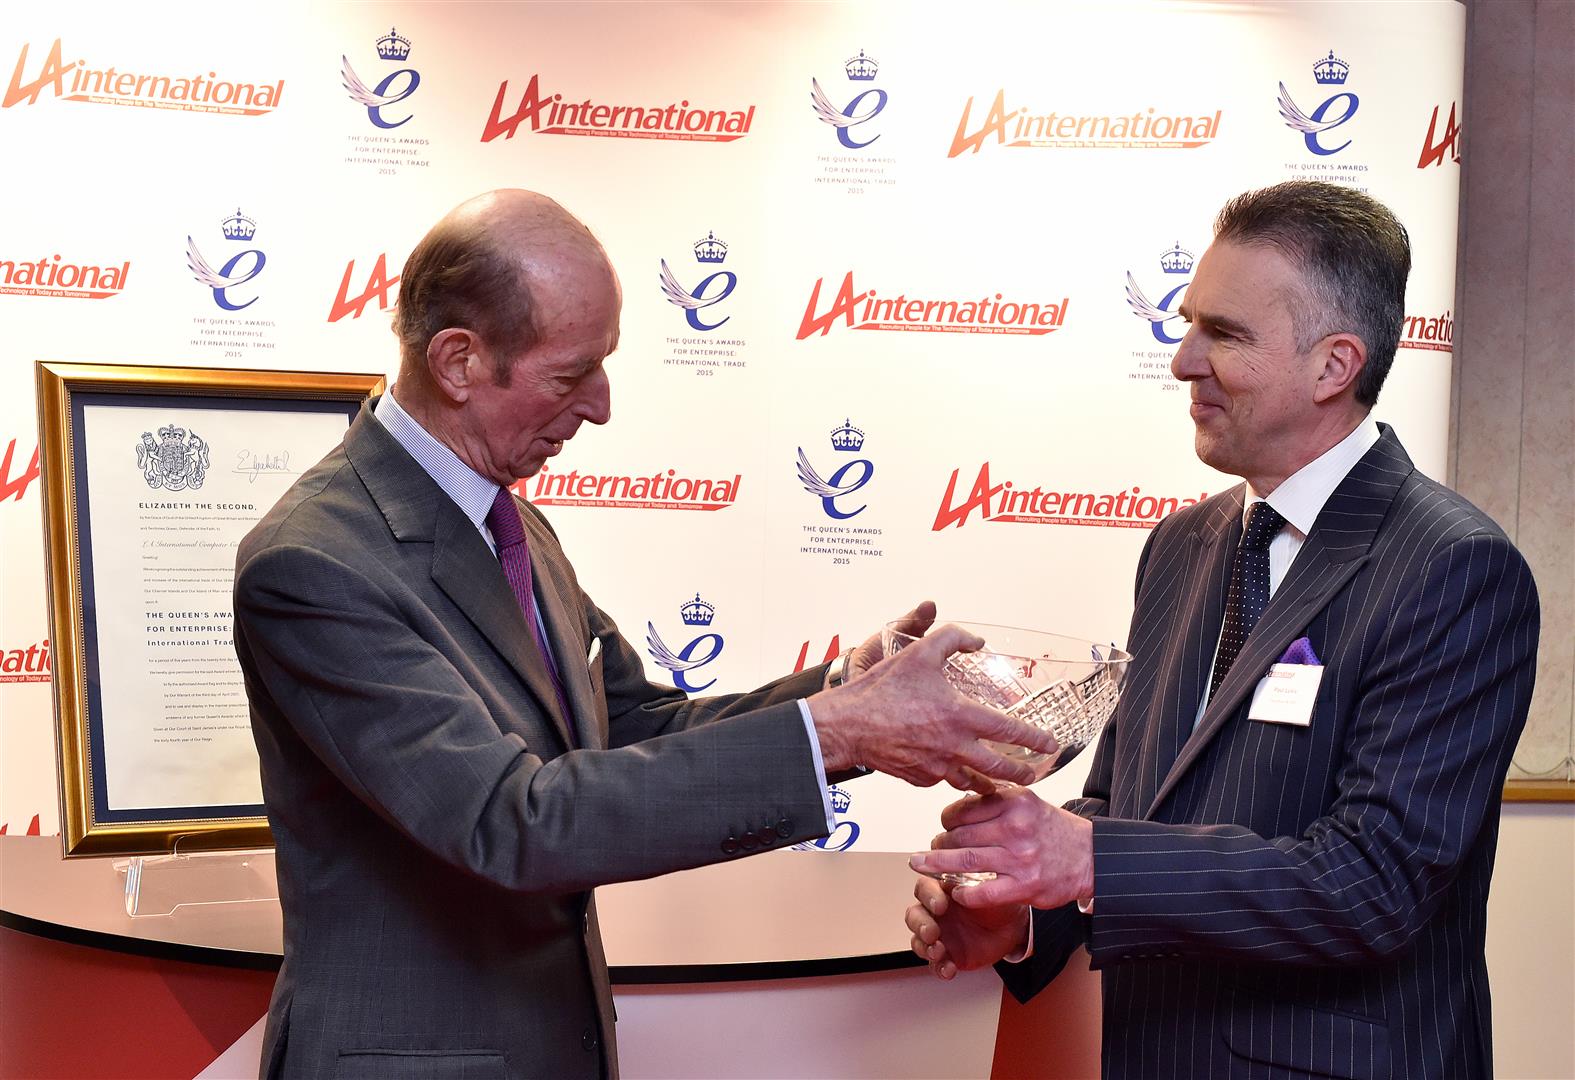 Photo caption: HRH The Duke of Kent presents the Queen’s Award for International Trade to LA International Chairman and Chief Executive Paul Lukic